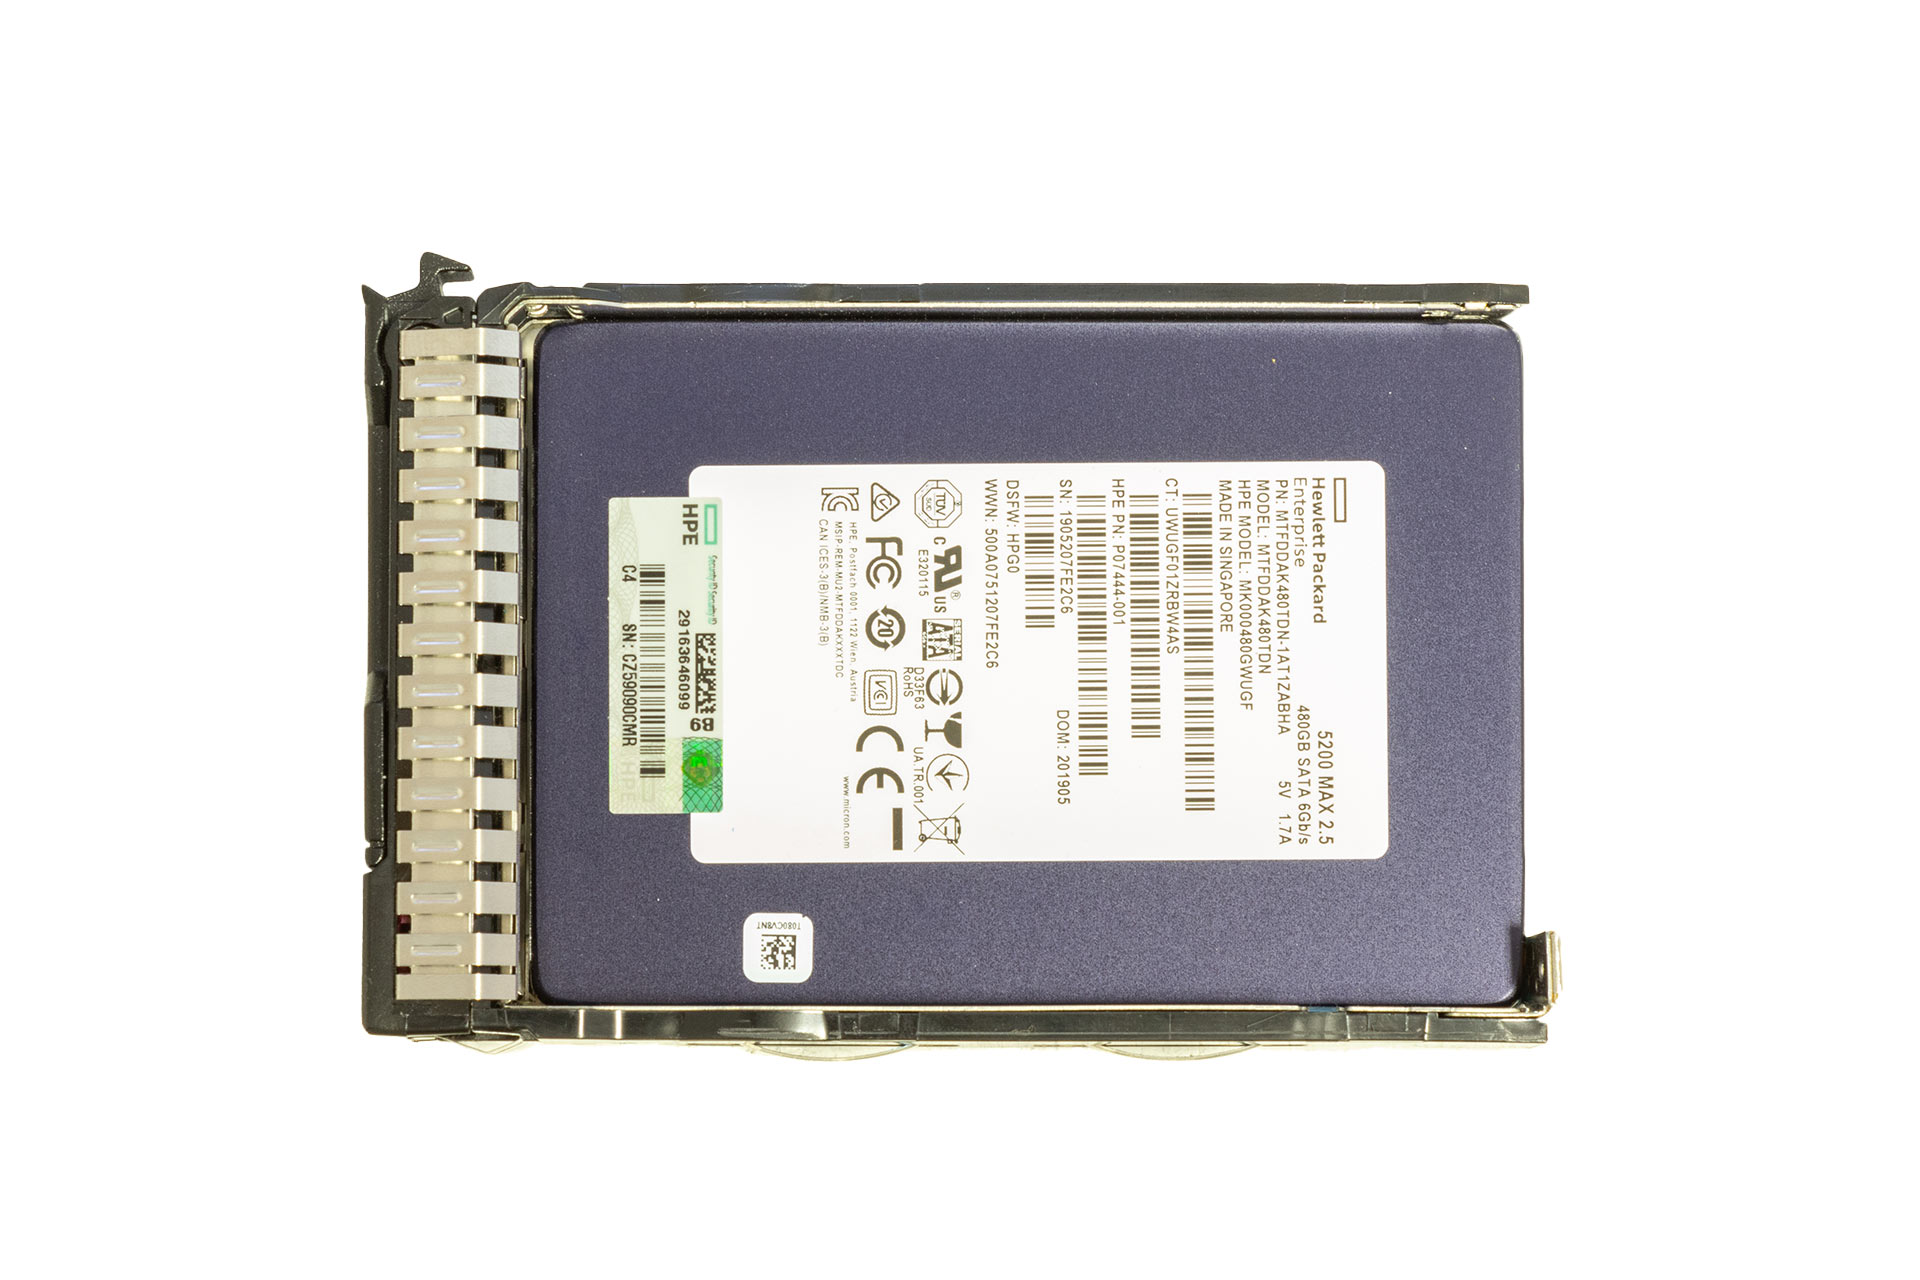 HPE SSD 480GB 6G SATA SSD 2.5“ SFF Mixed Used Solid State Drive für Gen8-Gen10 Server